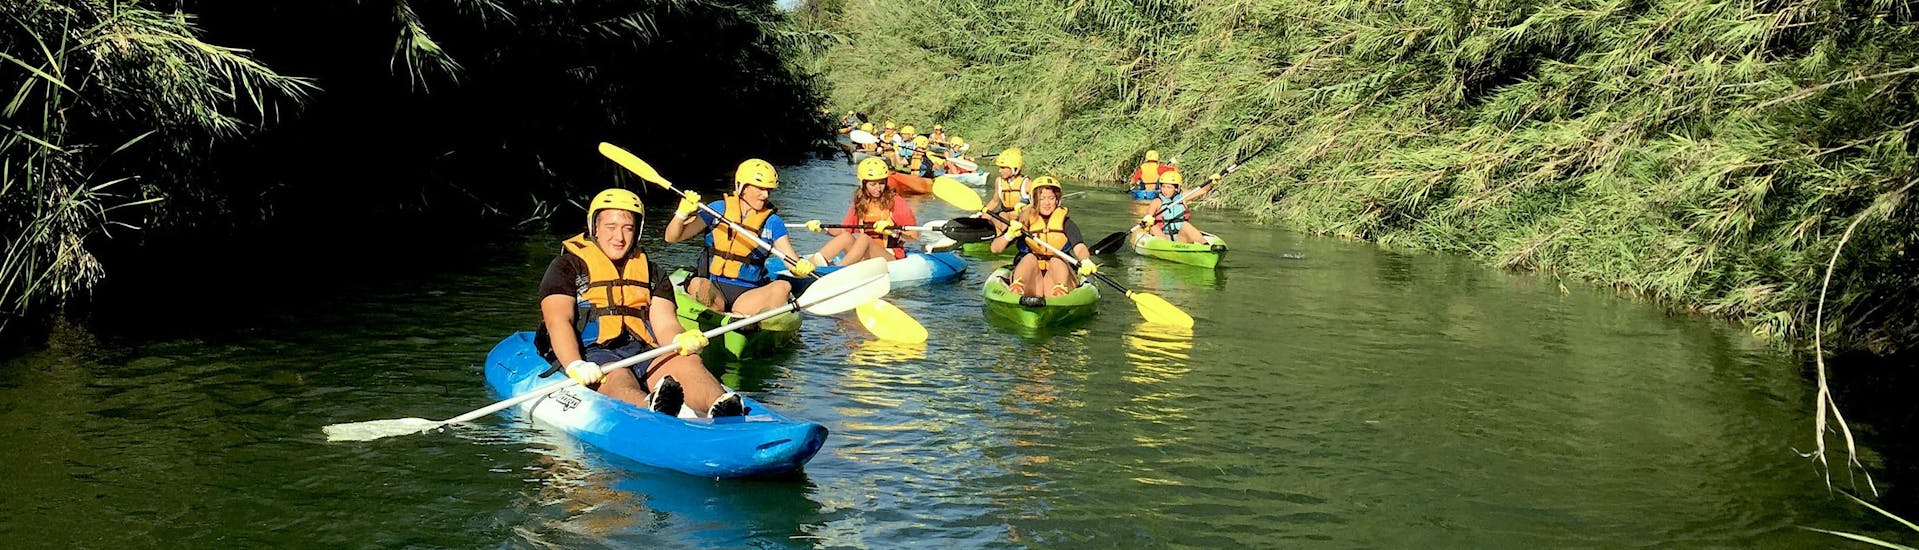 Kayak for Families & Friends - Río Turia.